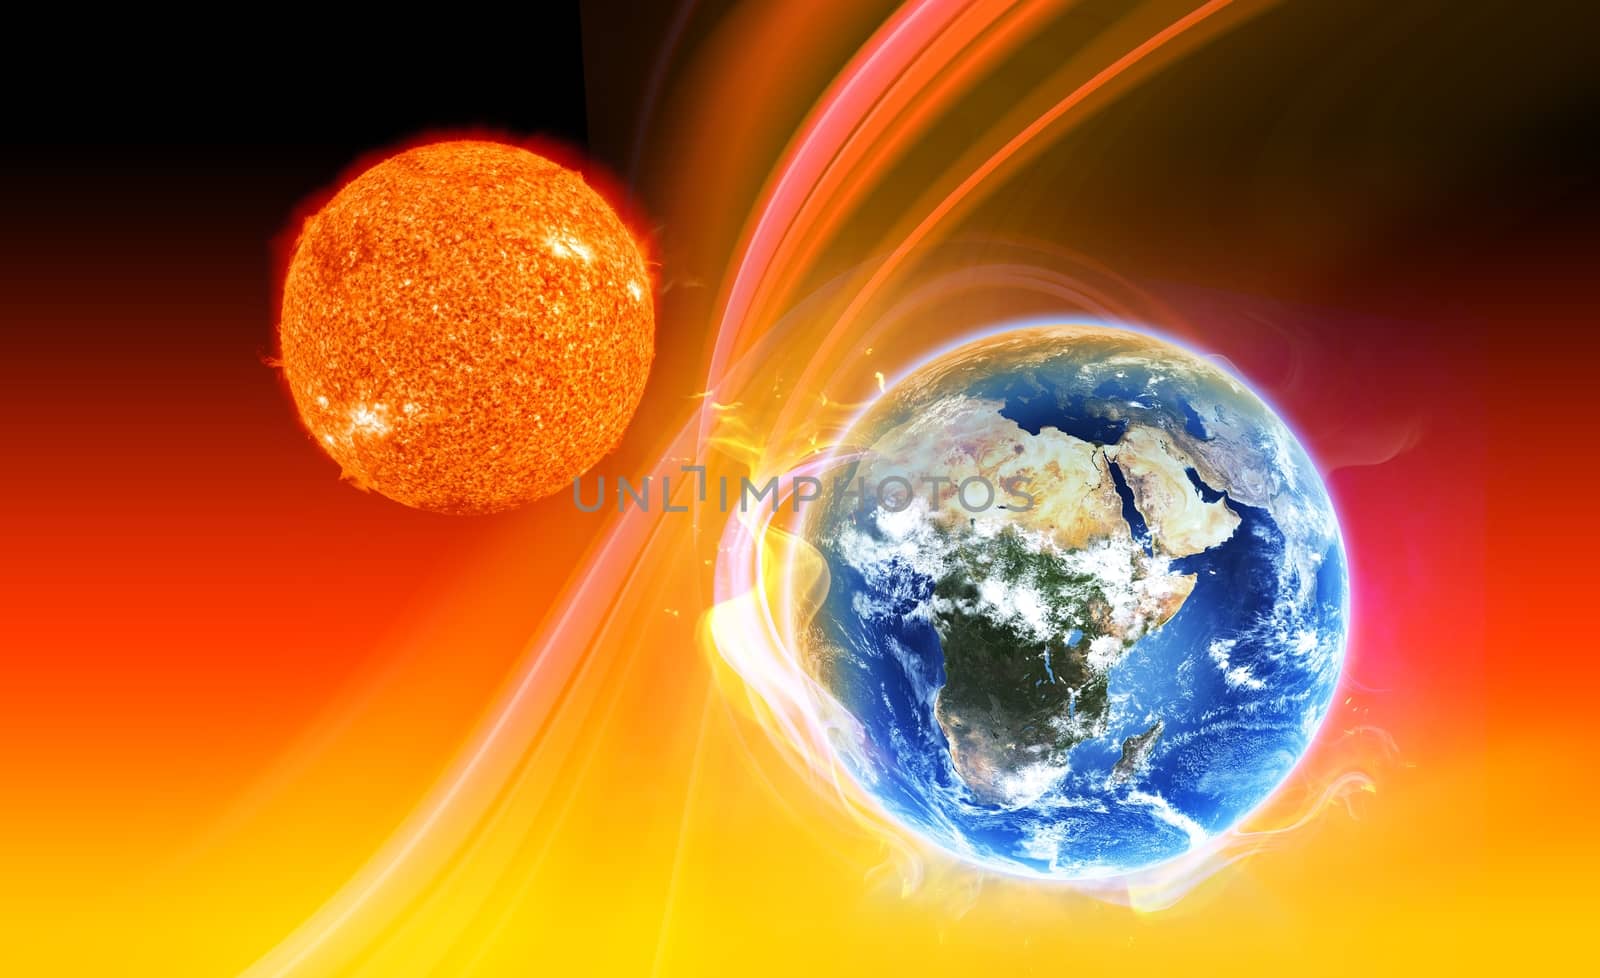 Sun heating earth atmosphere illustration global warming concept